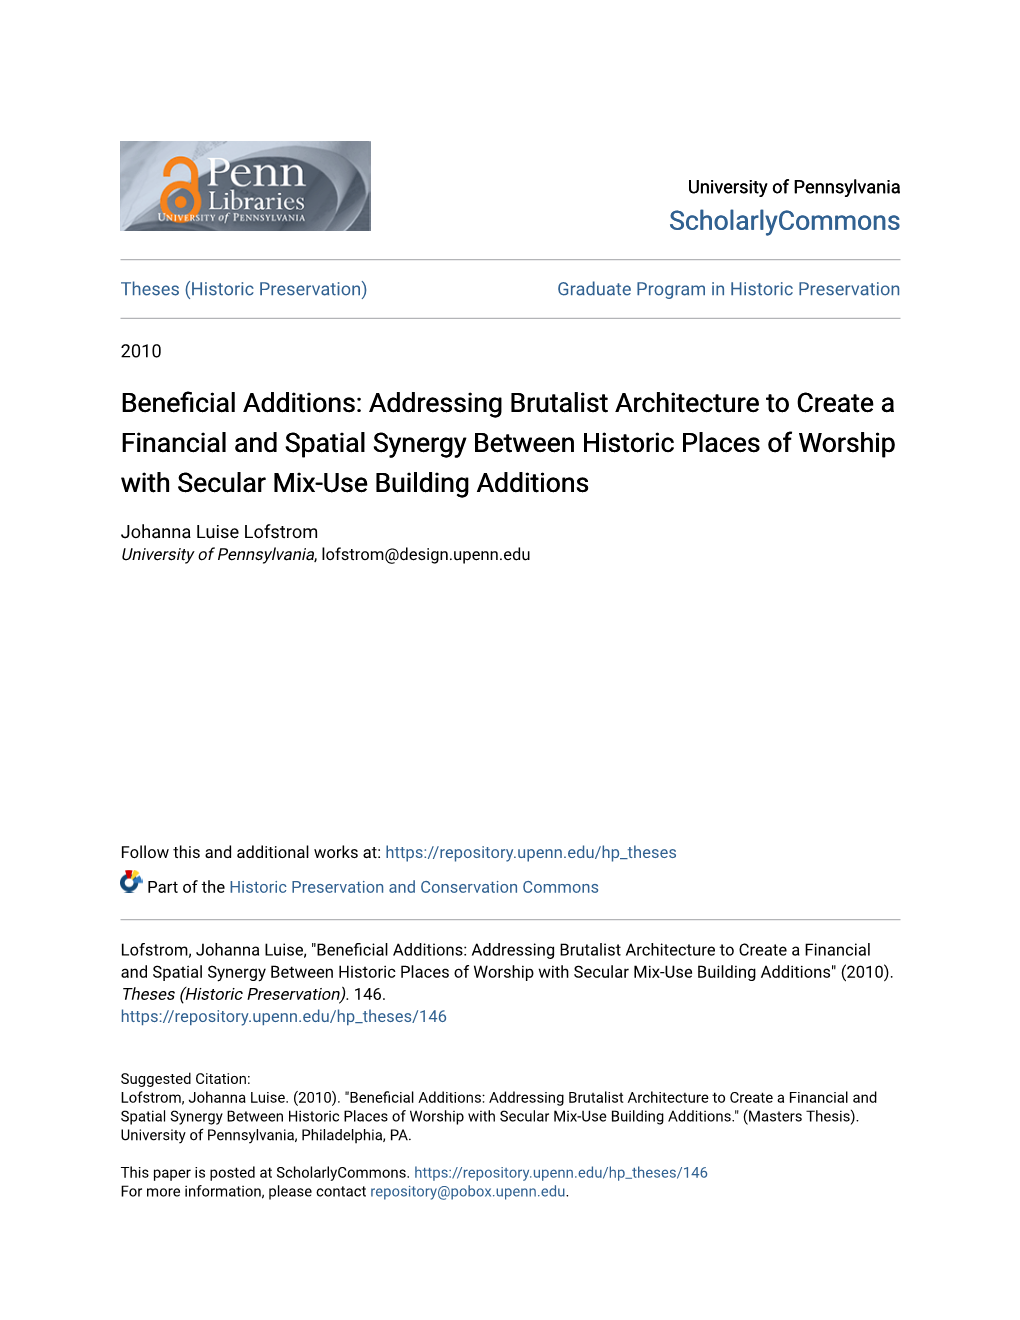 Beneficial Additions: Addressing Brutalist Architecture to Create a Financial and Spatial Synergy Between Historic Places Of